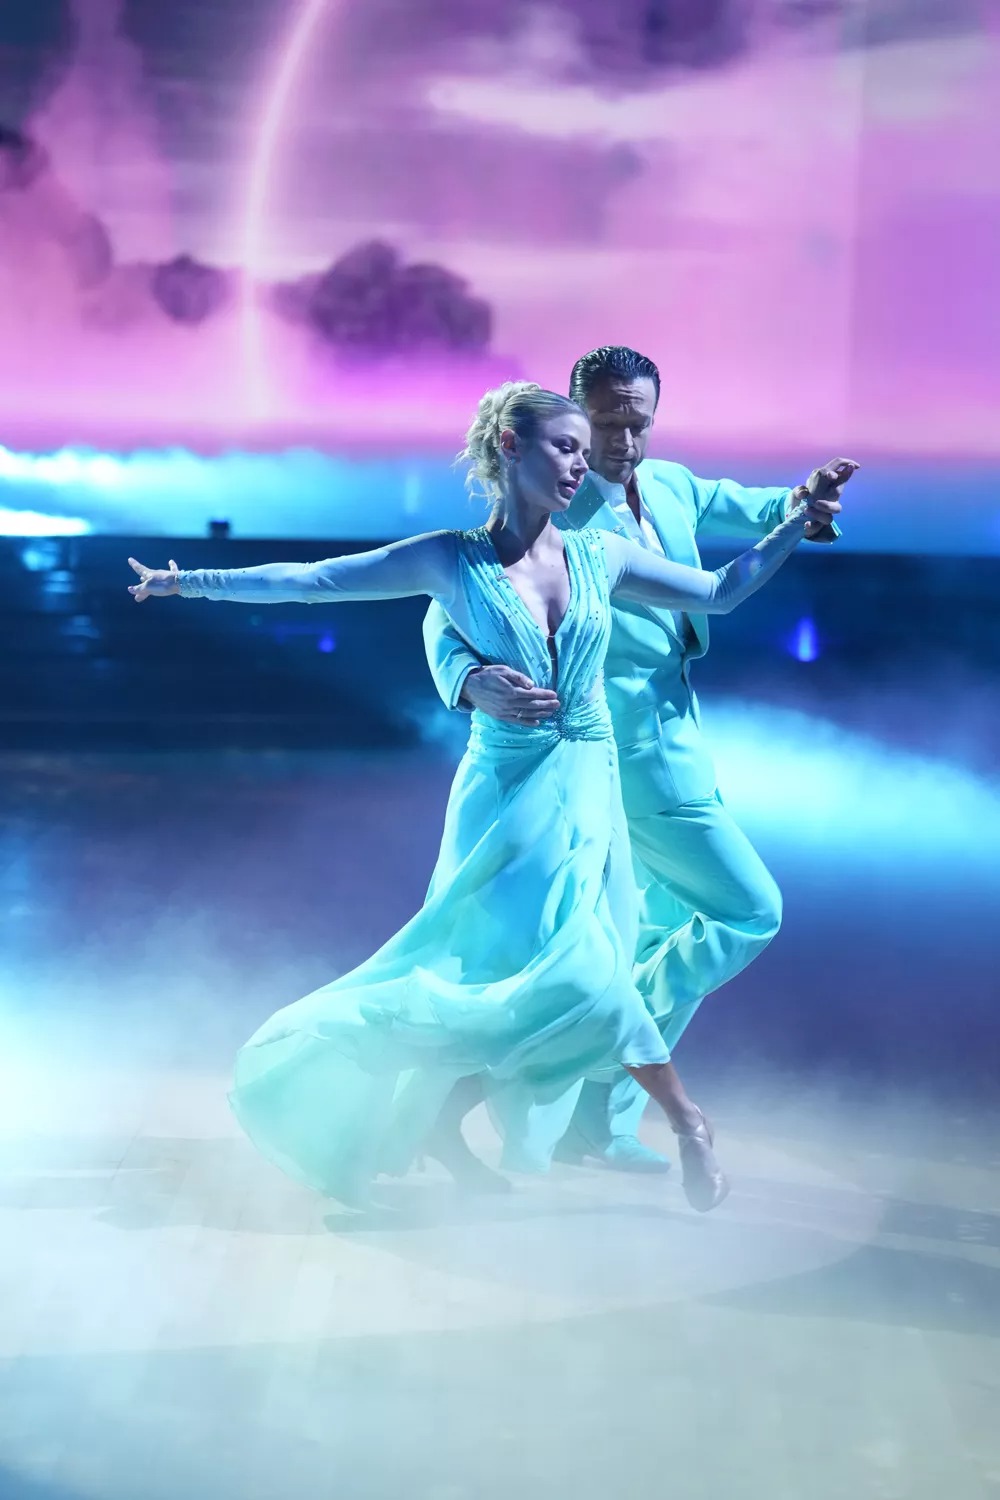 Daniella Karagach Says Making It to DWTS Finale with Husband Pasha Pashkov Has Been a Team Effort